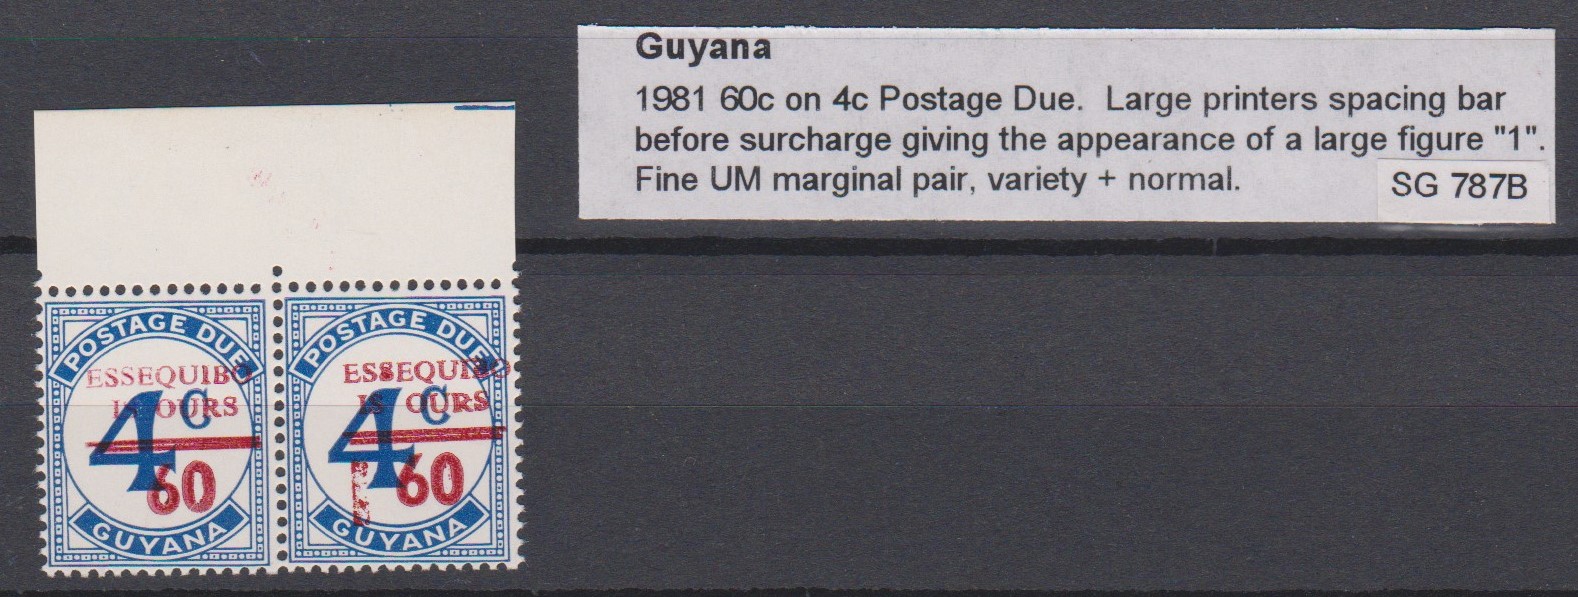 Guyana 1981 60c on 4c Postage Due, large printer spacing pair before surcharge giving the appearance